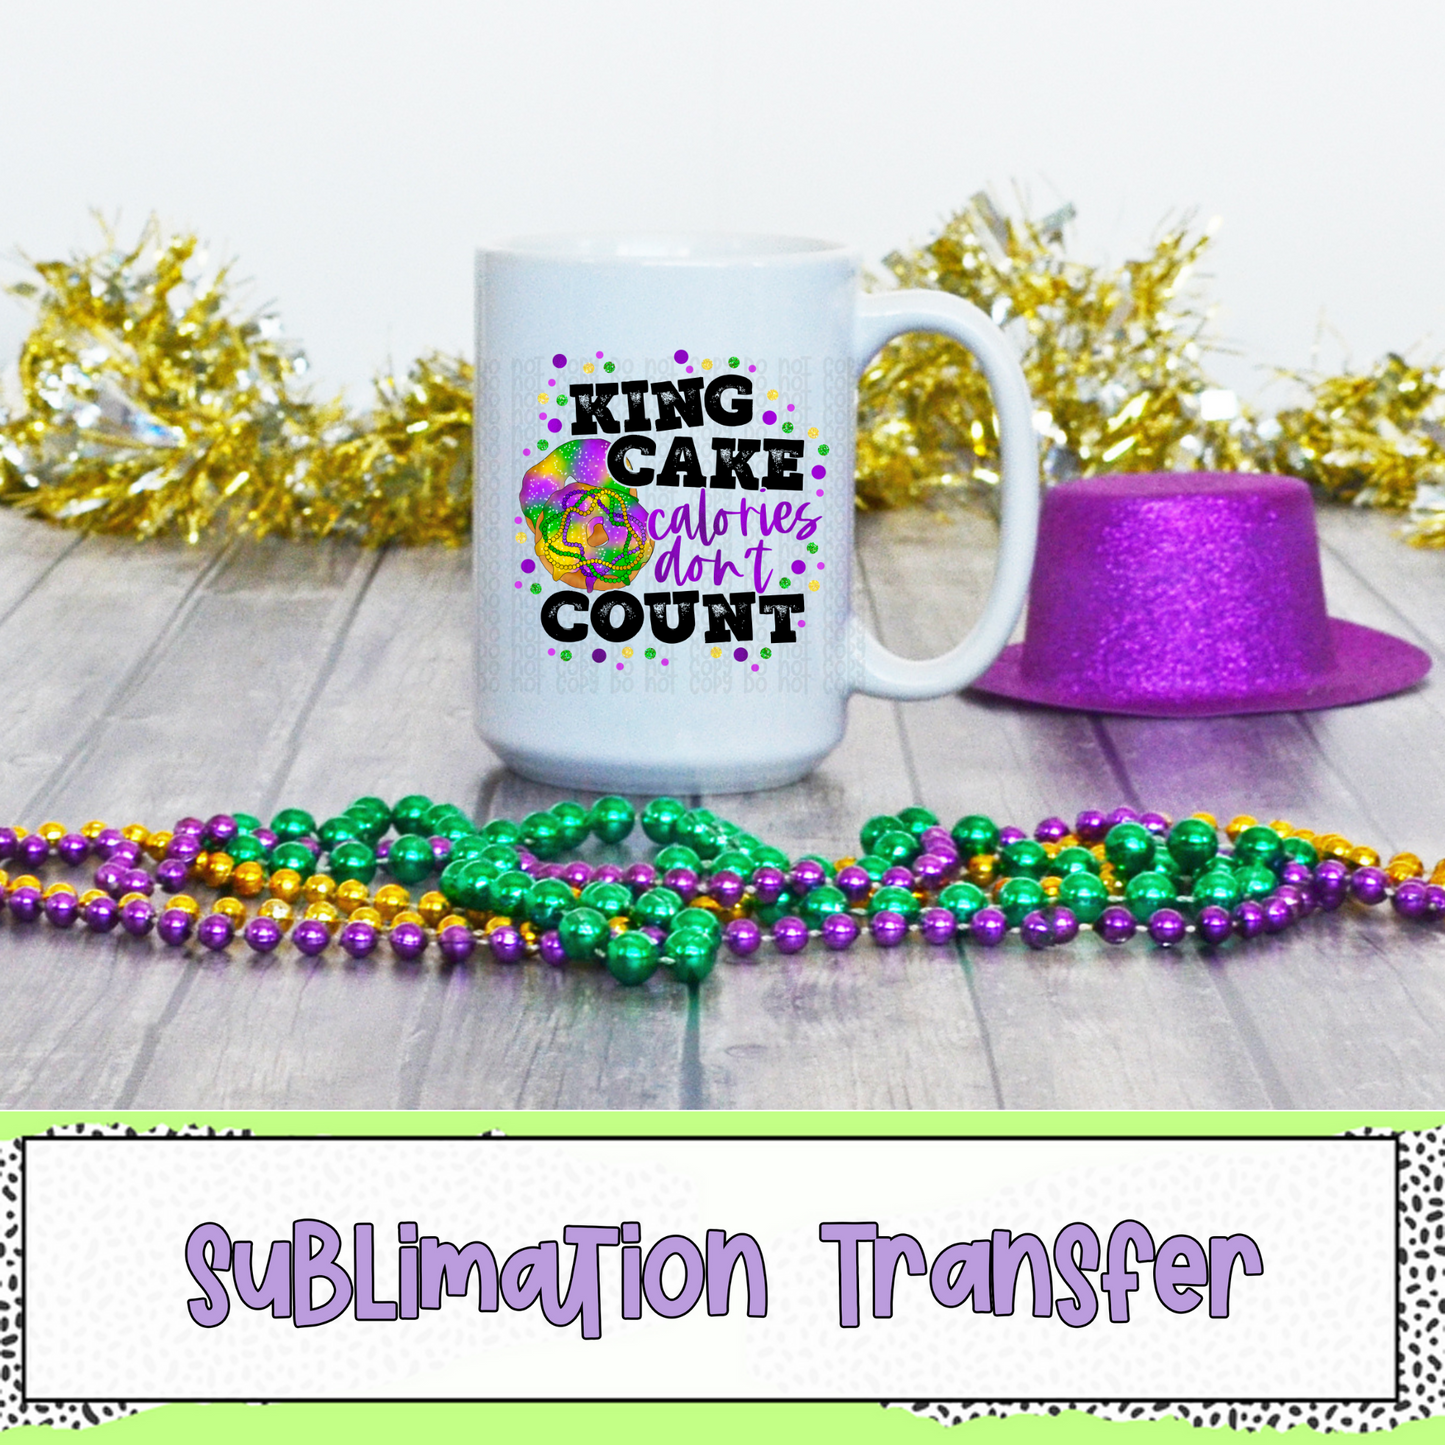 King Cake Calories Don't Count - SUBLIMATION TRANSFER